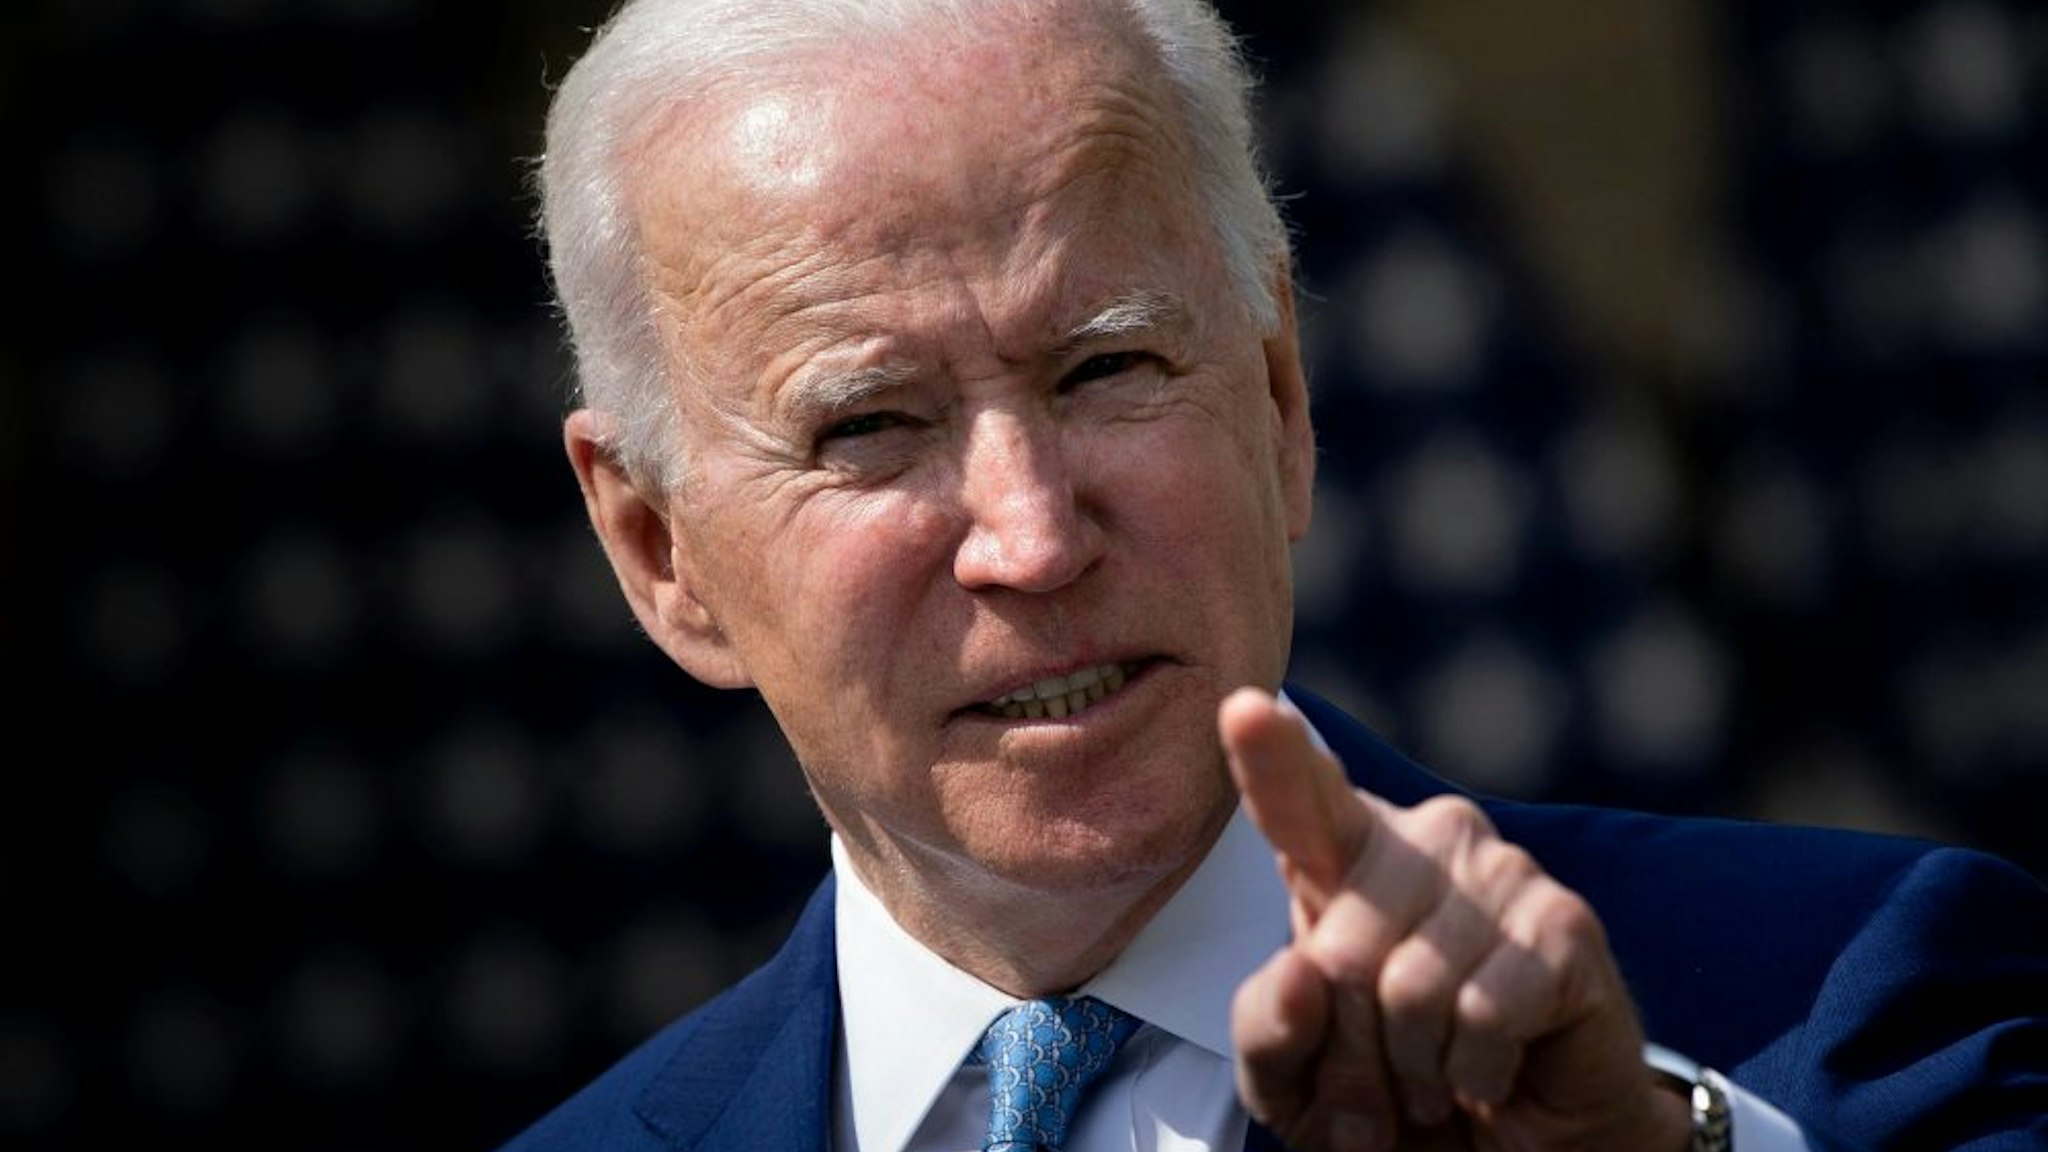 US President Joe Biden speaks from the Rose Garden of the White House about gun violence on April 8, 2021, in Washington, DC. - Biden on Thursday called US gun violence an "epidemic" at a White House ceremony to unveil new attempts to get the problem under control.